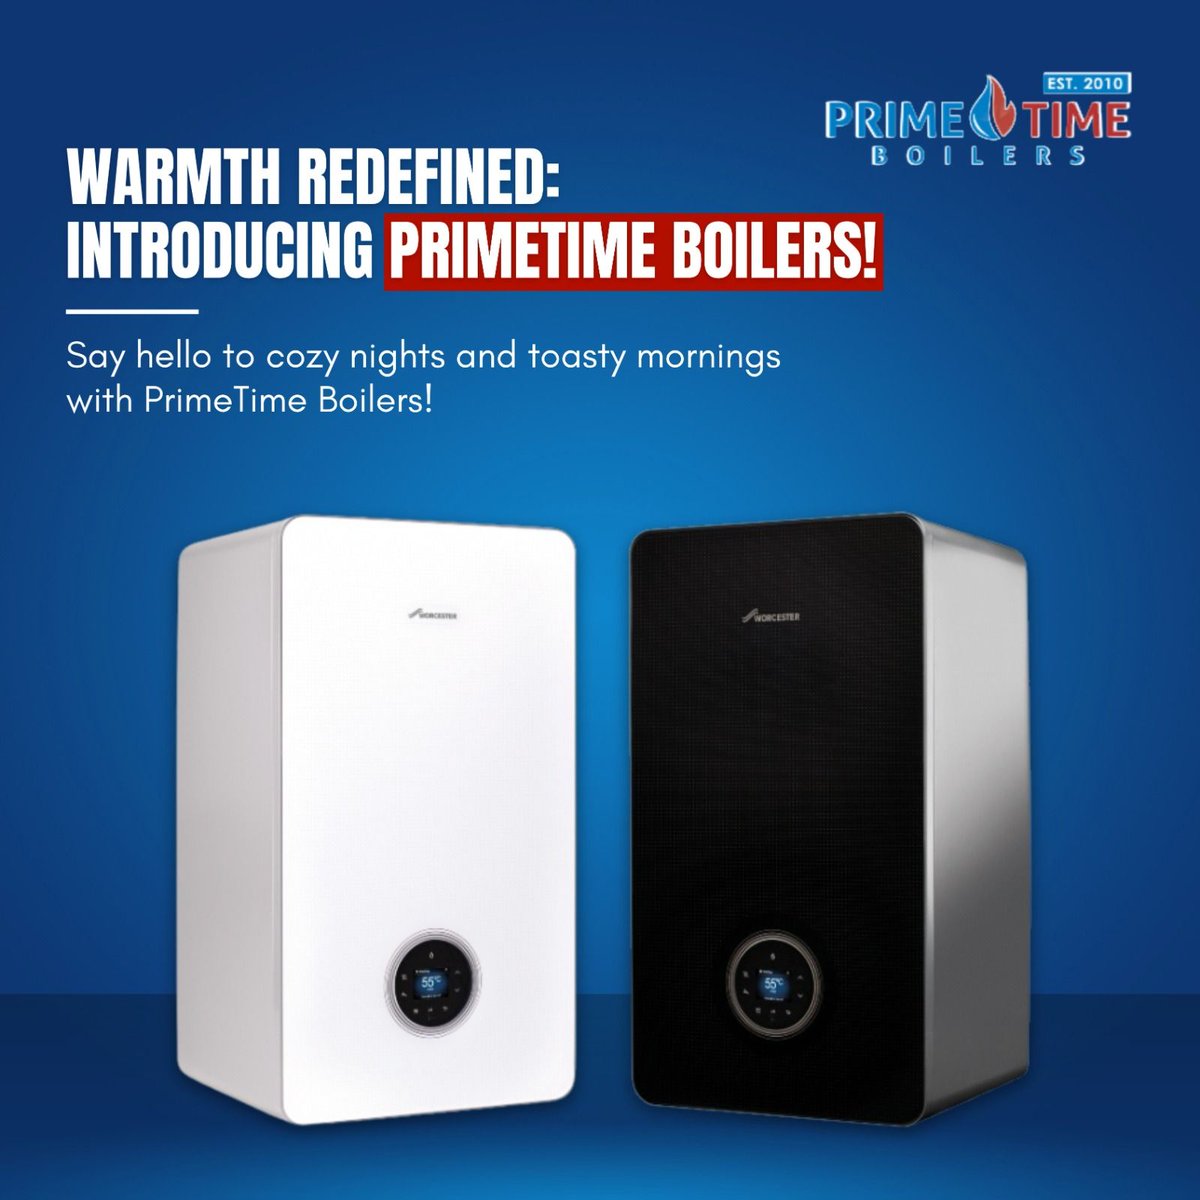 Say hello to cozy nights and toasty mornings with PrimeTime Boilers! 🔥 Our state-of-the-art heating solutions ensure that your home stays warm and comfortable all year round. 
.
.
.
.
#PrimeTimeBoilers #HomeComfort #EfficientHeating #ModernLiving #UpgradeYourHome